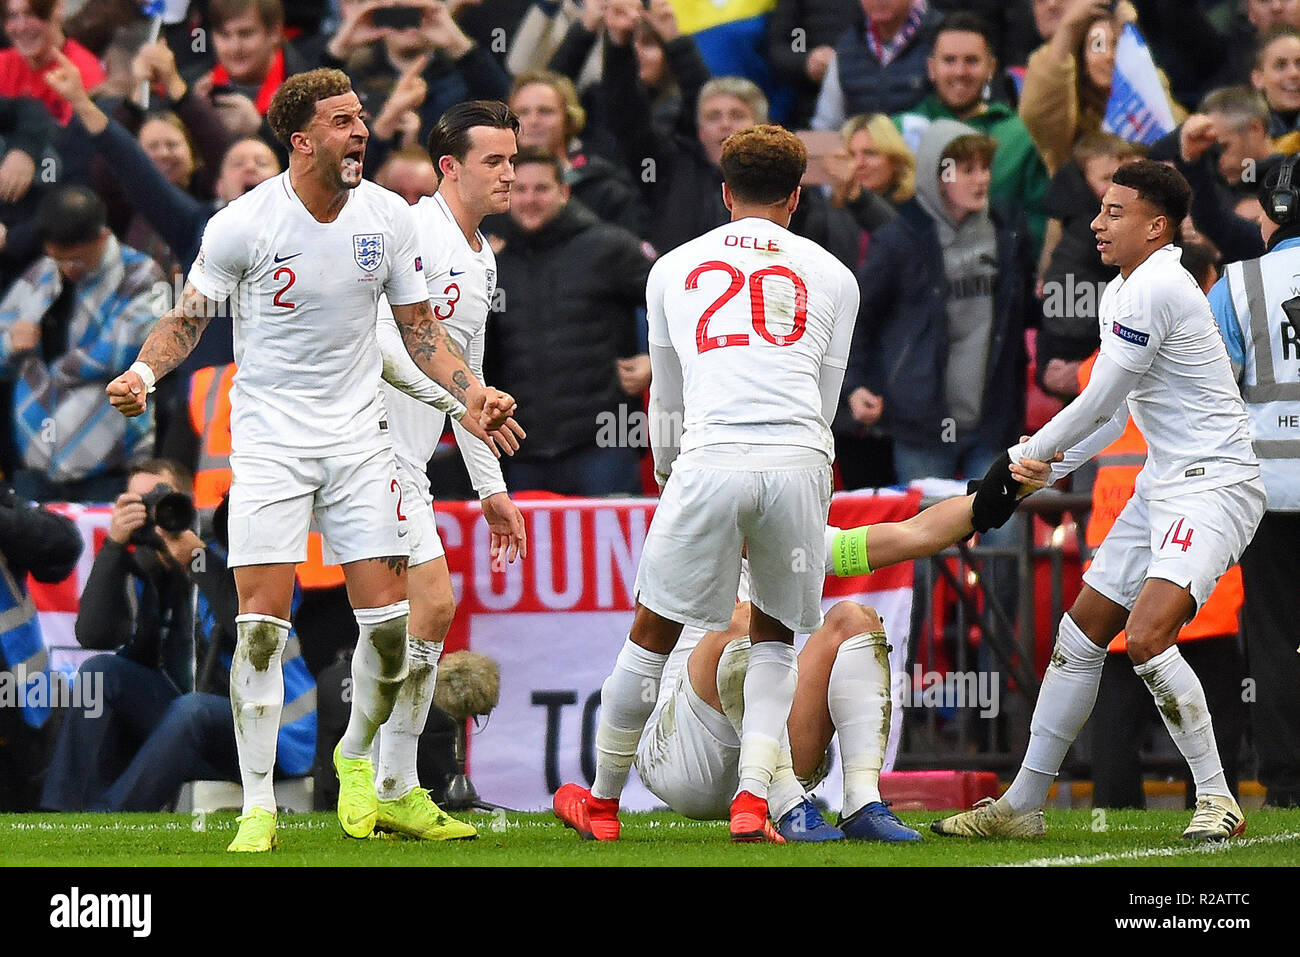 London, UK. 18th November 2018. England defender Kyle Walker (2) (left) shows his emotion after Harry Kane scores a late winner during the UEFA Nations League match between England and Croatia at Wembley Stadium, London on Sunday 18th November 2018. (©MI News & Sport Ltd | Alamy Live News) Stock Photo